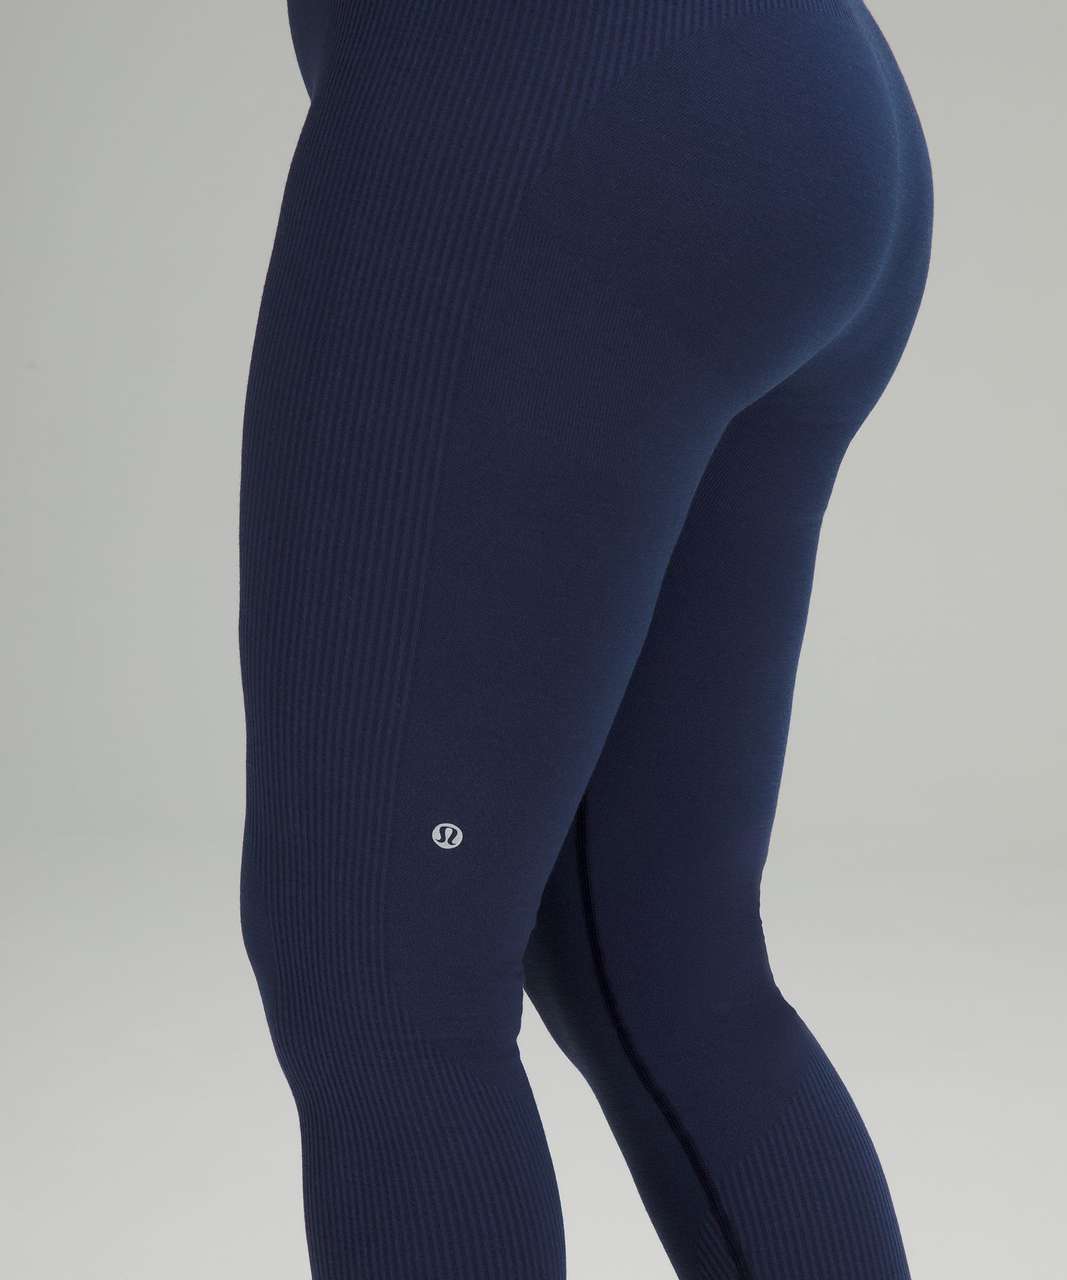 Lululemon Keep the Heat Thermal High-Rise Tight 27 - Athletic apparel